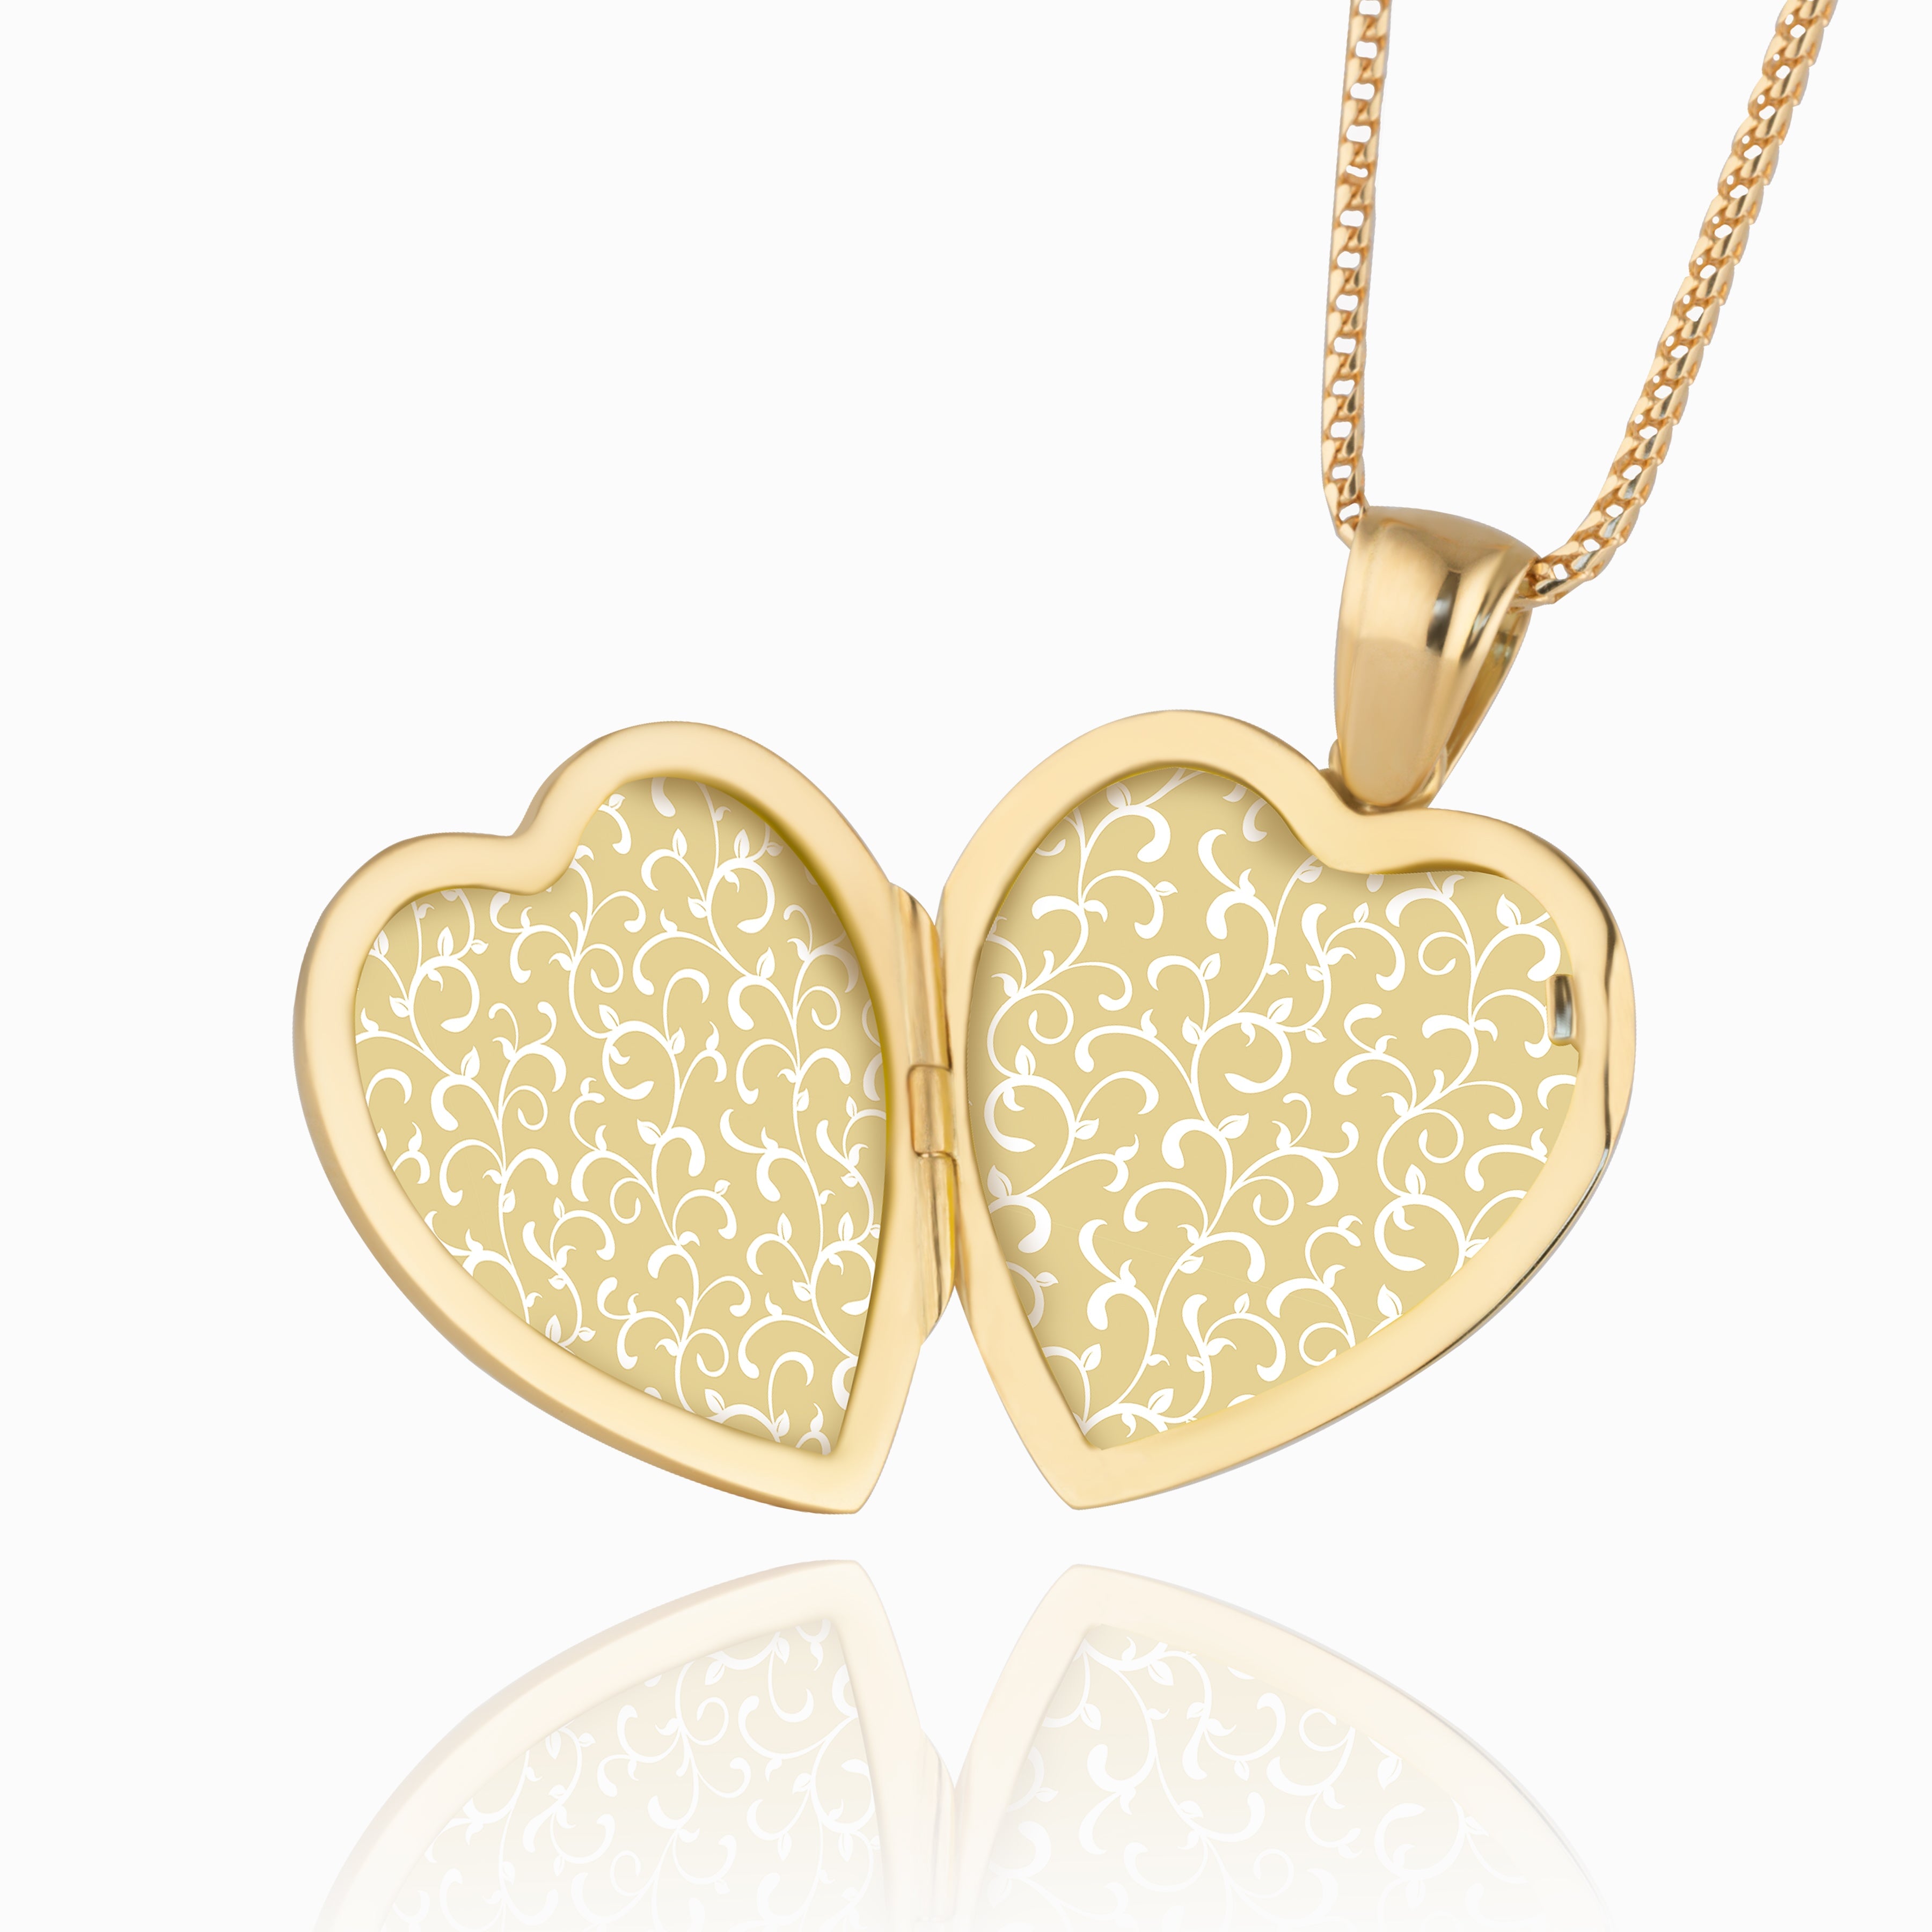 Product title: 18 ct Spring Flowers Gold Locket, product type: Locket